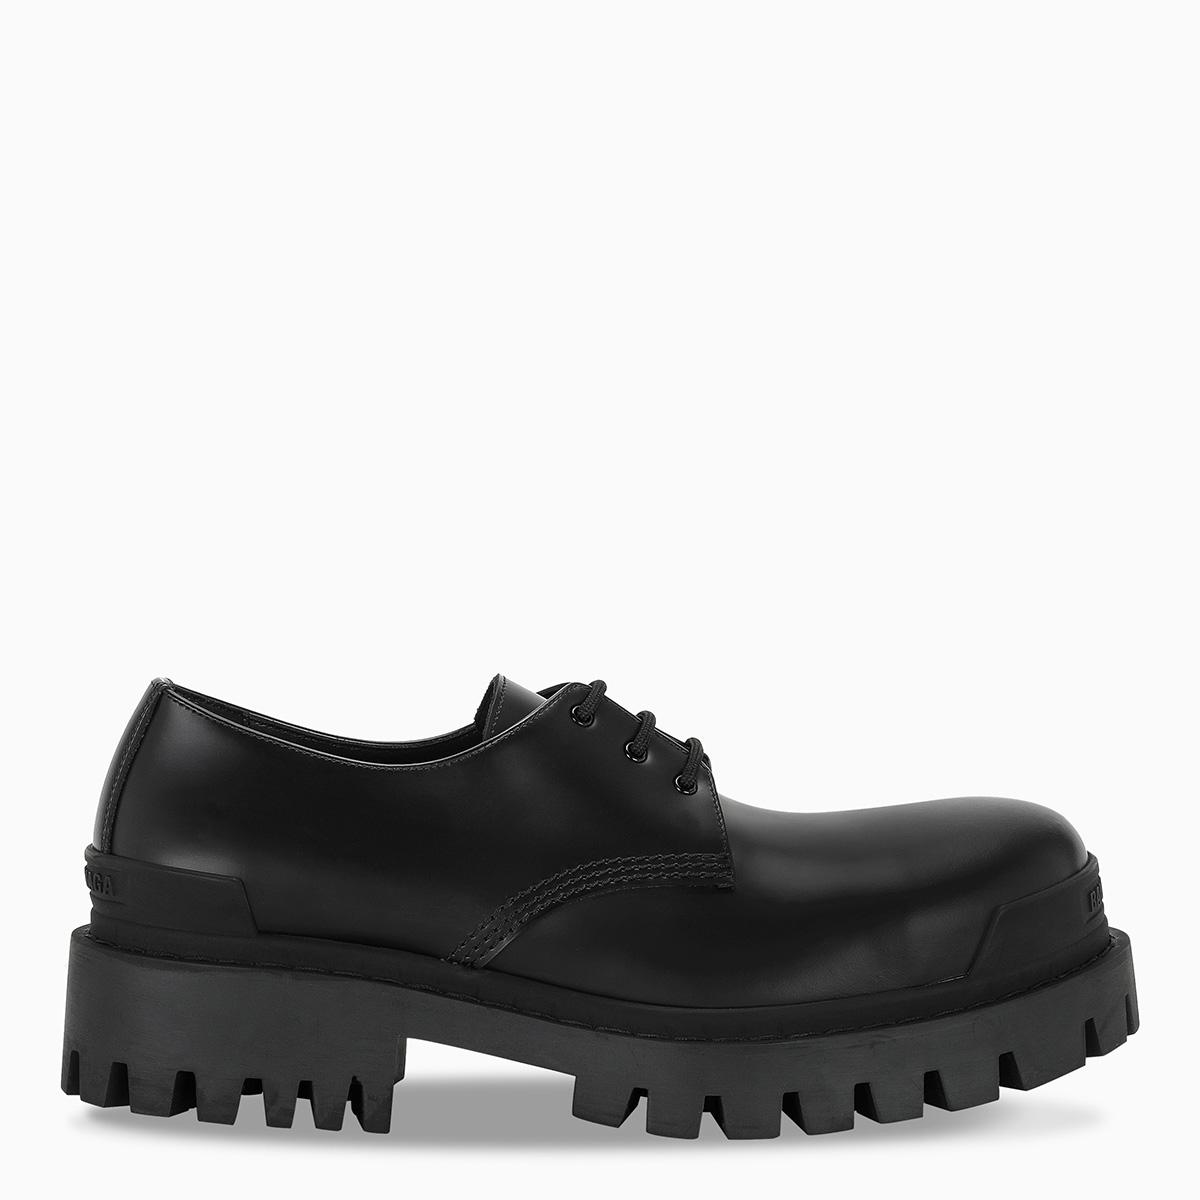 Balenciaga Leather Chunky Shoes in Black for Men - Lyst